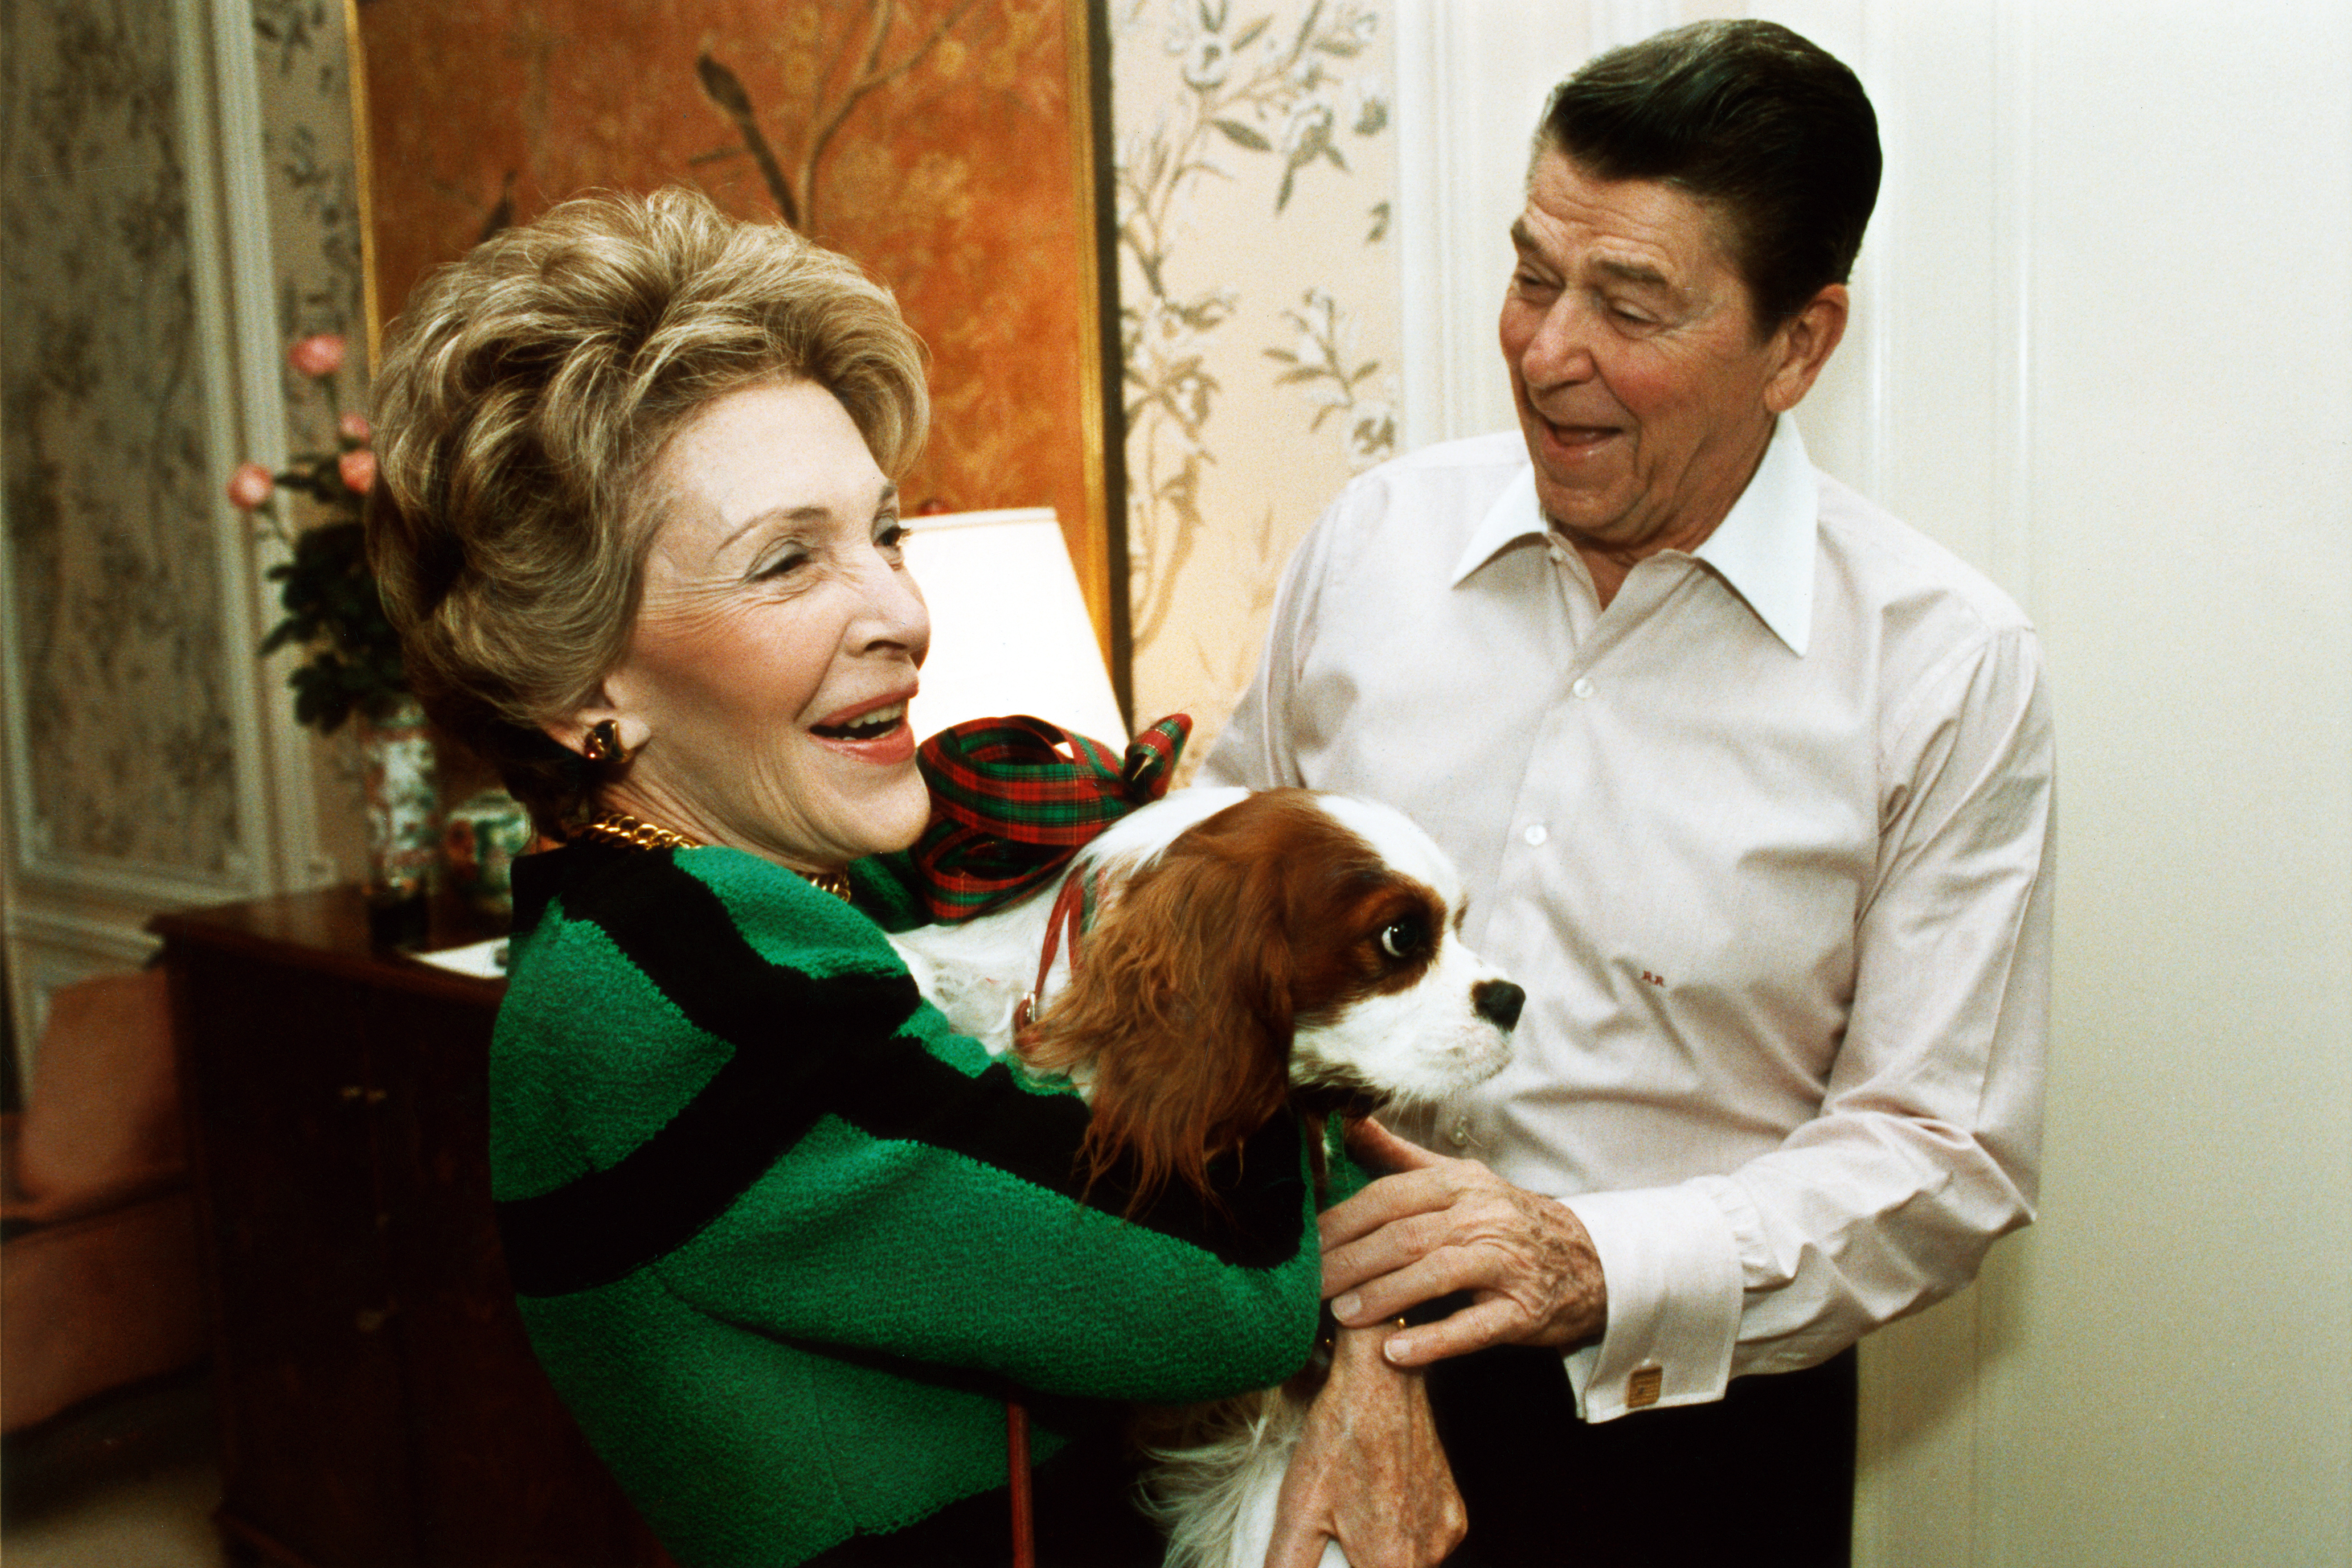 President Ronald Reagan presents First Lady Nancy Reagan with an early Christmas present of a King Charles Spaniel named Rex, at their suite in a New York hotel on Dec. 6, 1985.